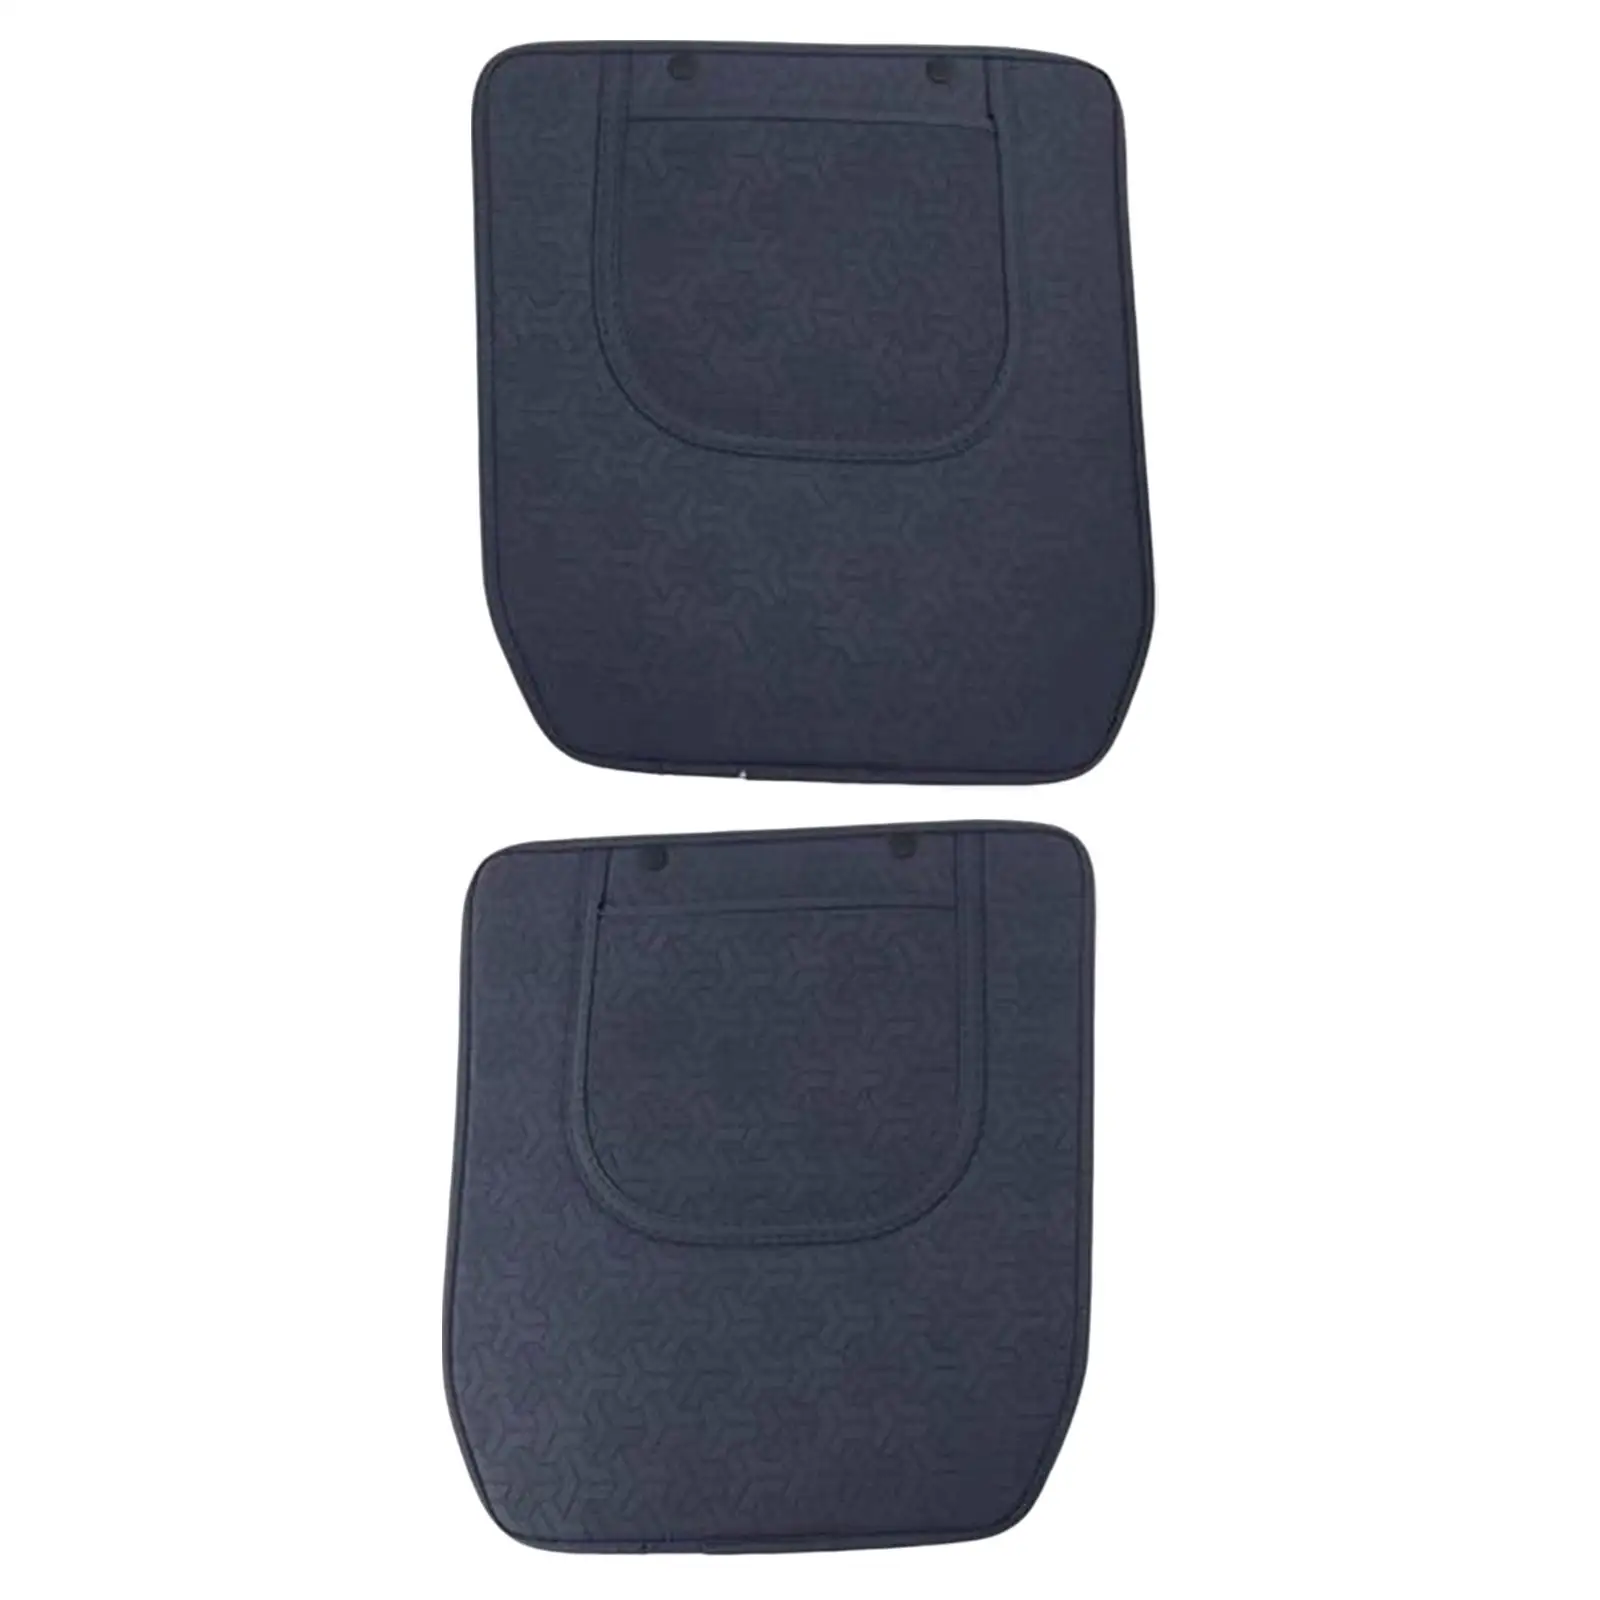 Durable kick Mats pad Replaces Anti Kicking Artificial Leather Vehicle Waterproof for Atto 3 Accessories